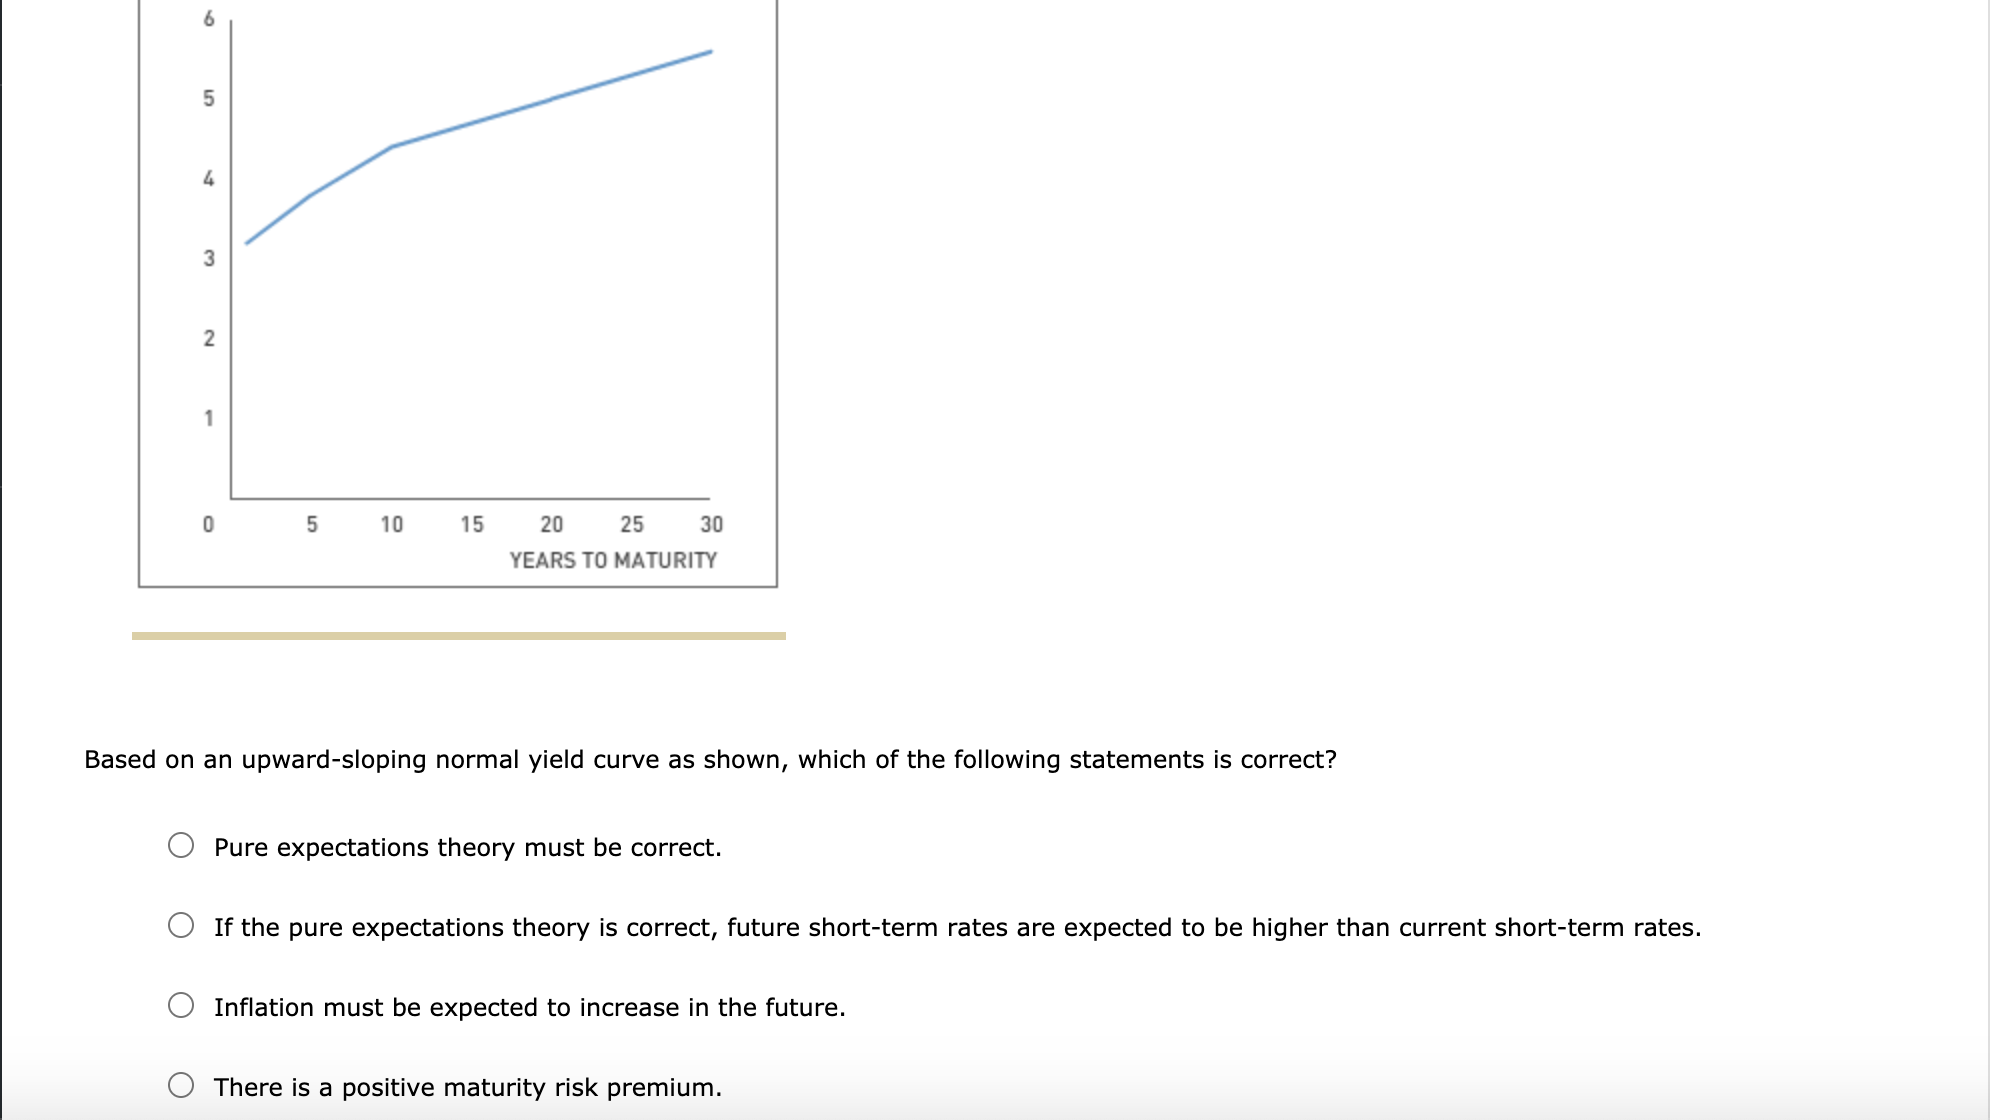 Based on an upward-sloping normal yield curve as shown, which of the following statements is correct?
Pure expectations theory must be correct.
If the pure expectations theory is correct, future short-term rates are expected to be higher than current short-term rates.
Inflation must be expected to increase in the future.
There is a positive maturity risk premium.
